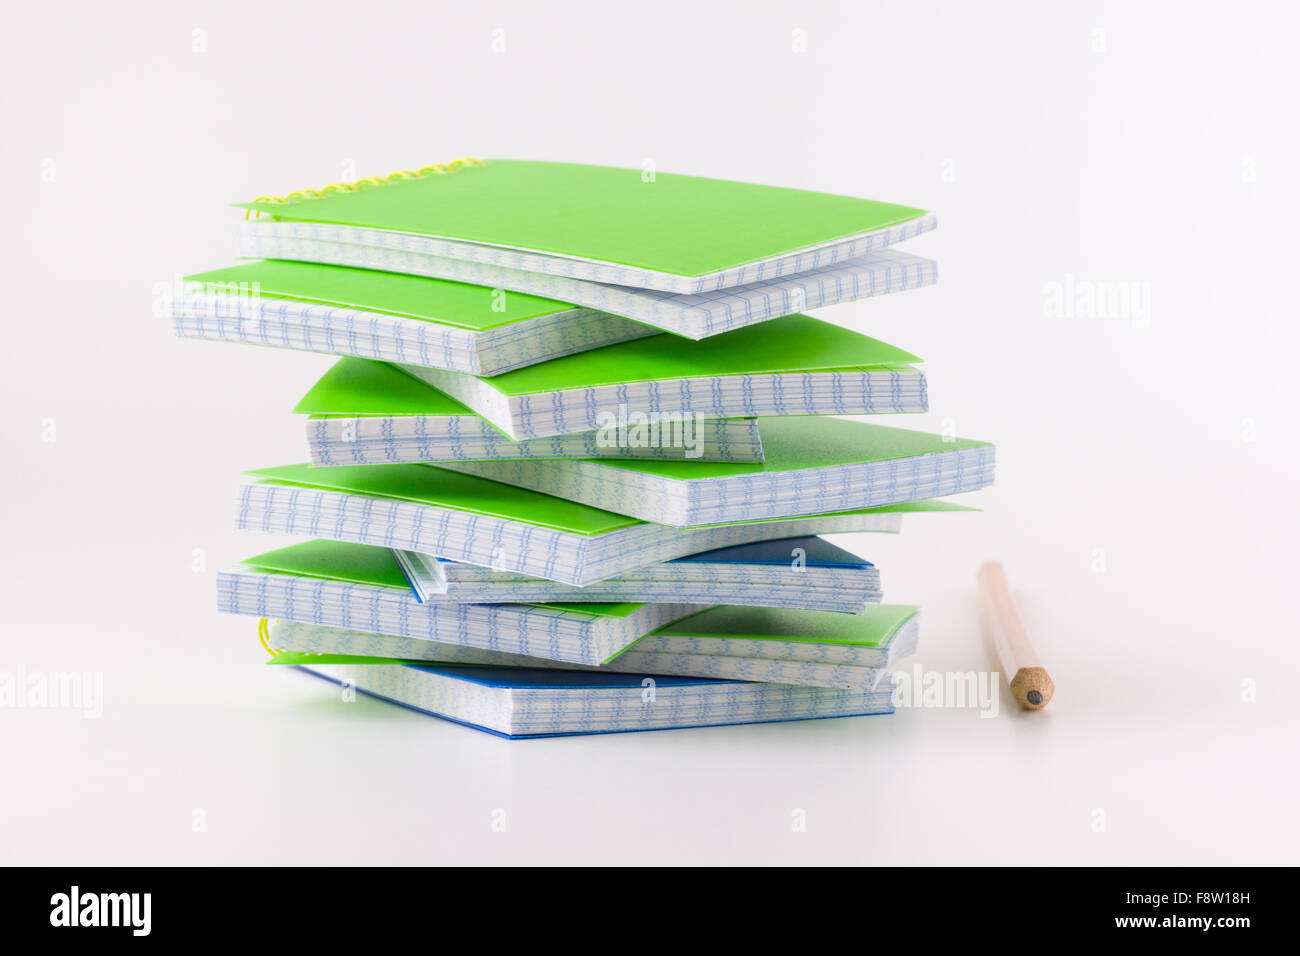 the pile of  notepads lies on a white background with a pencil Stock Photo